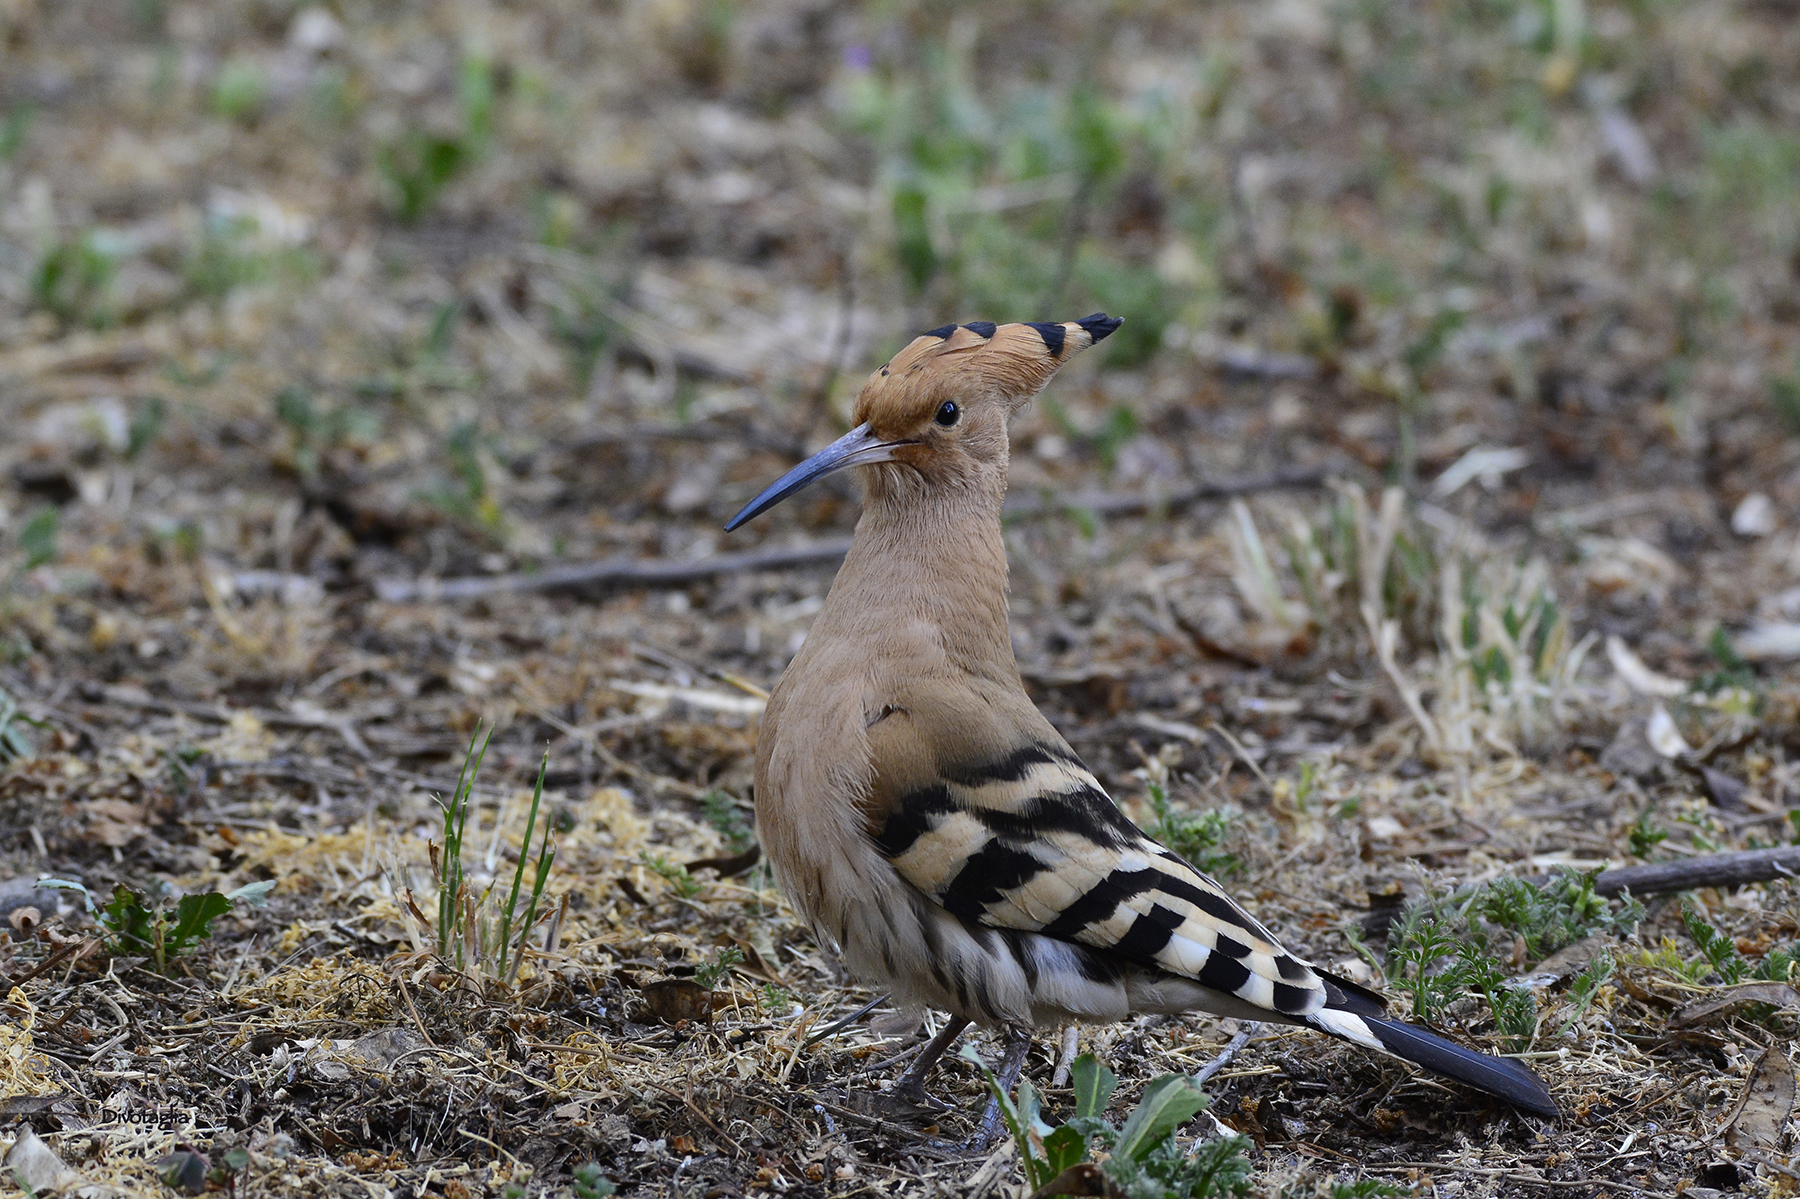 The hoopoe and 'round...